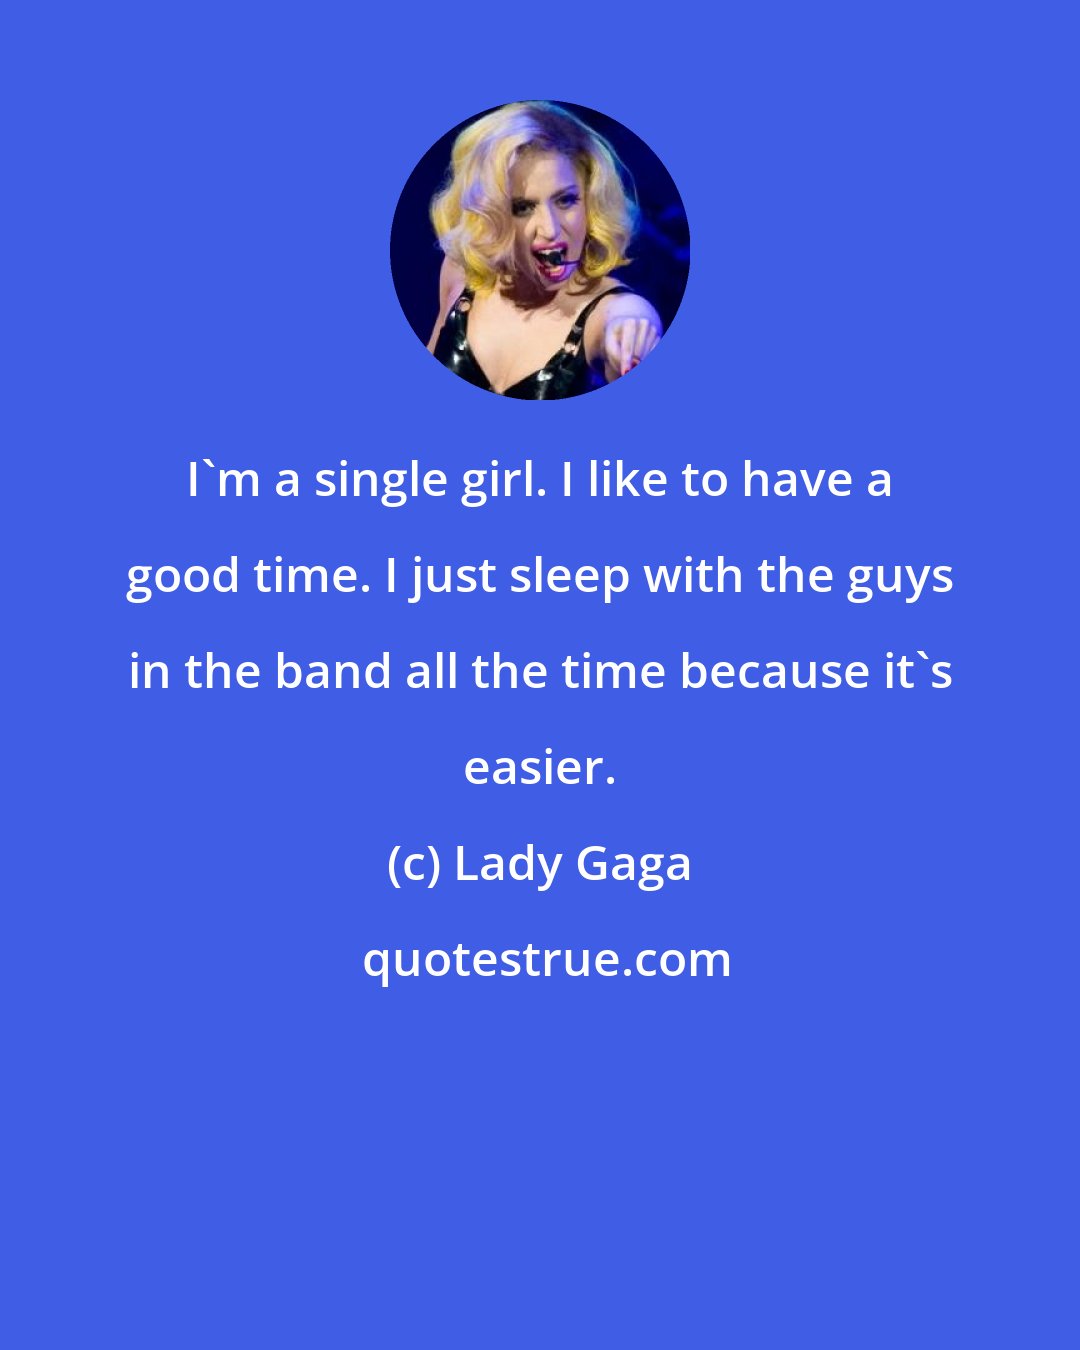 Lady Gaga: I'm a single girl. I like to have a good time. I just sleep with the guys in the band all the time because it's easier.